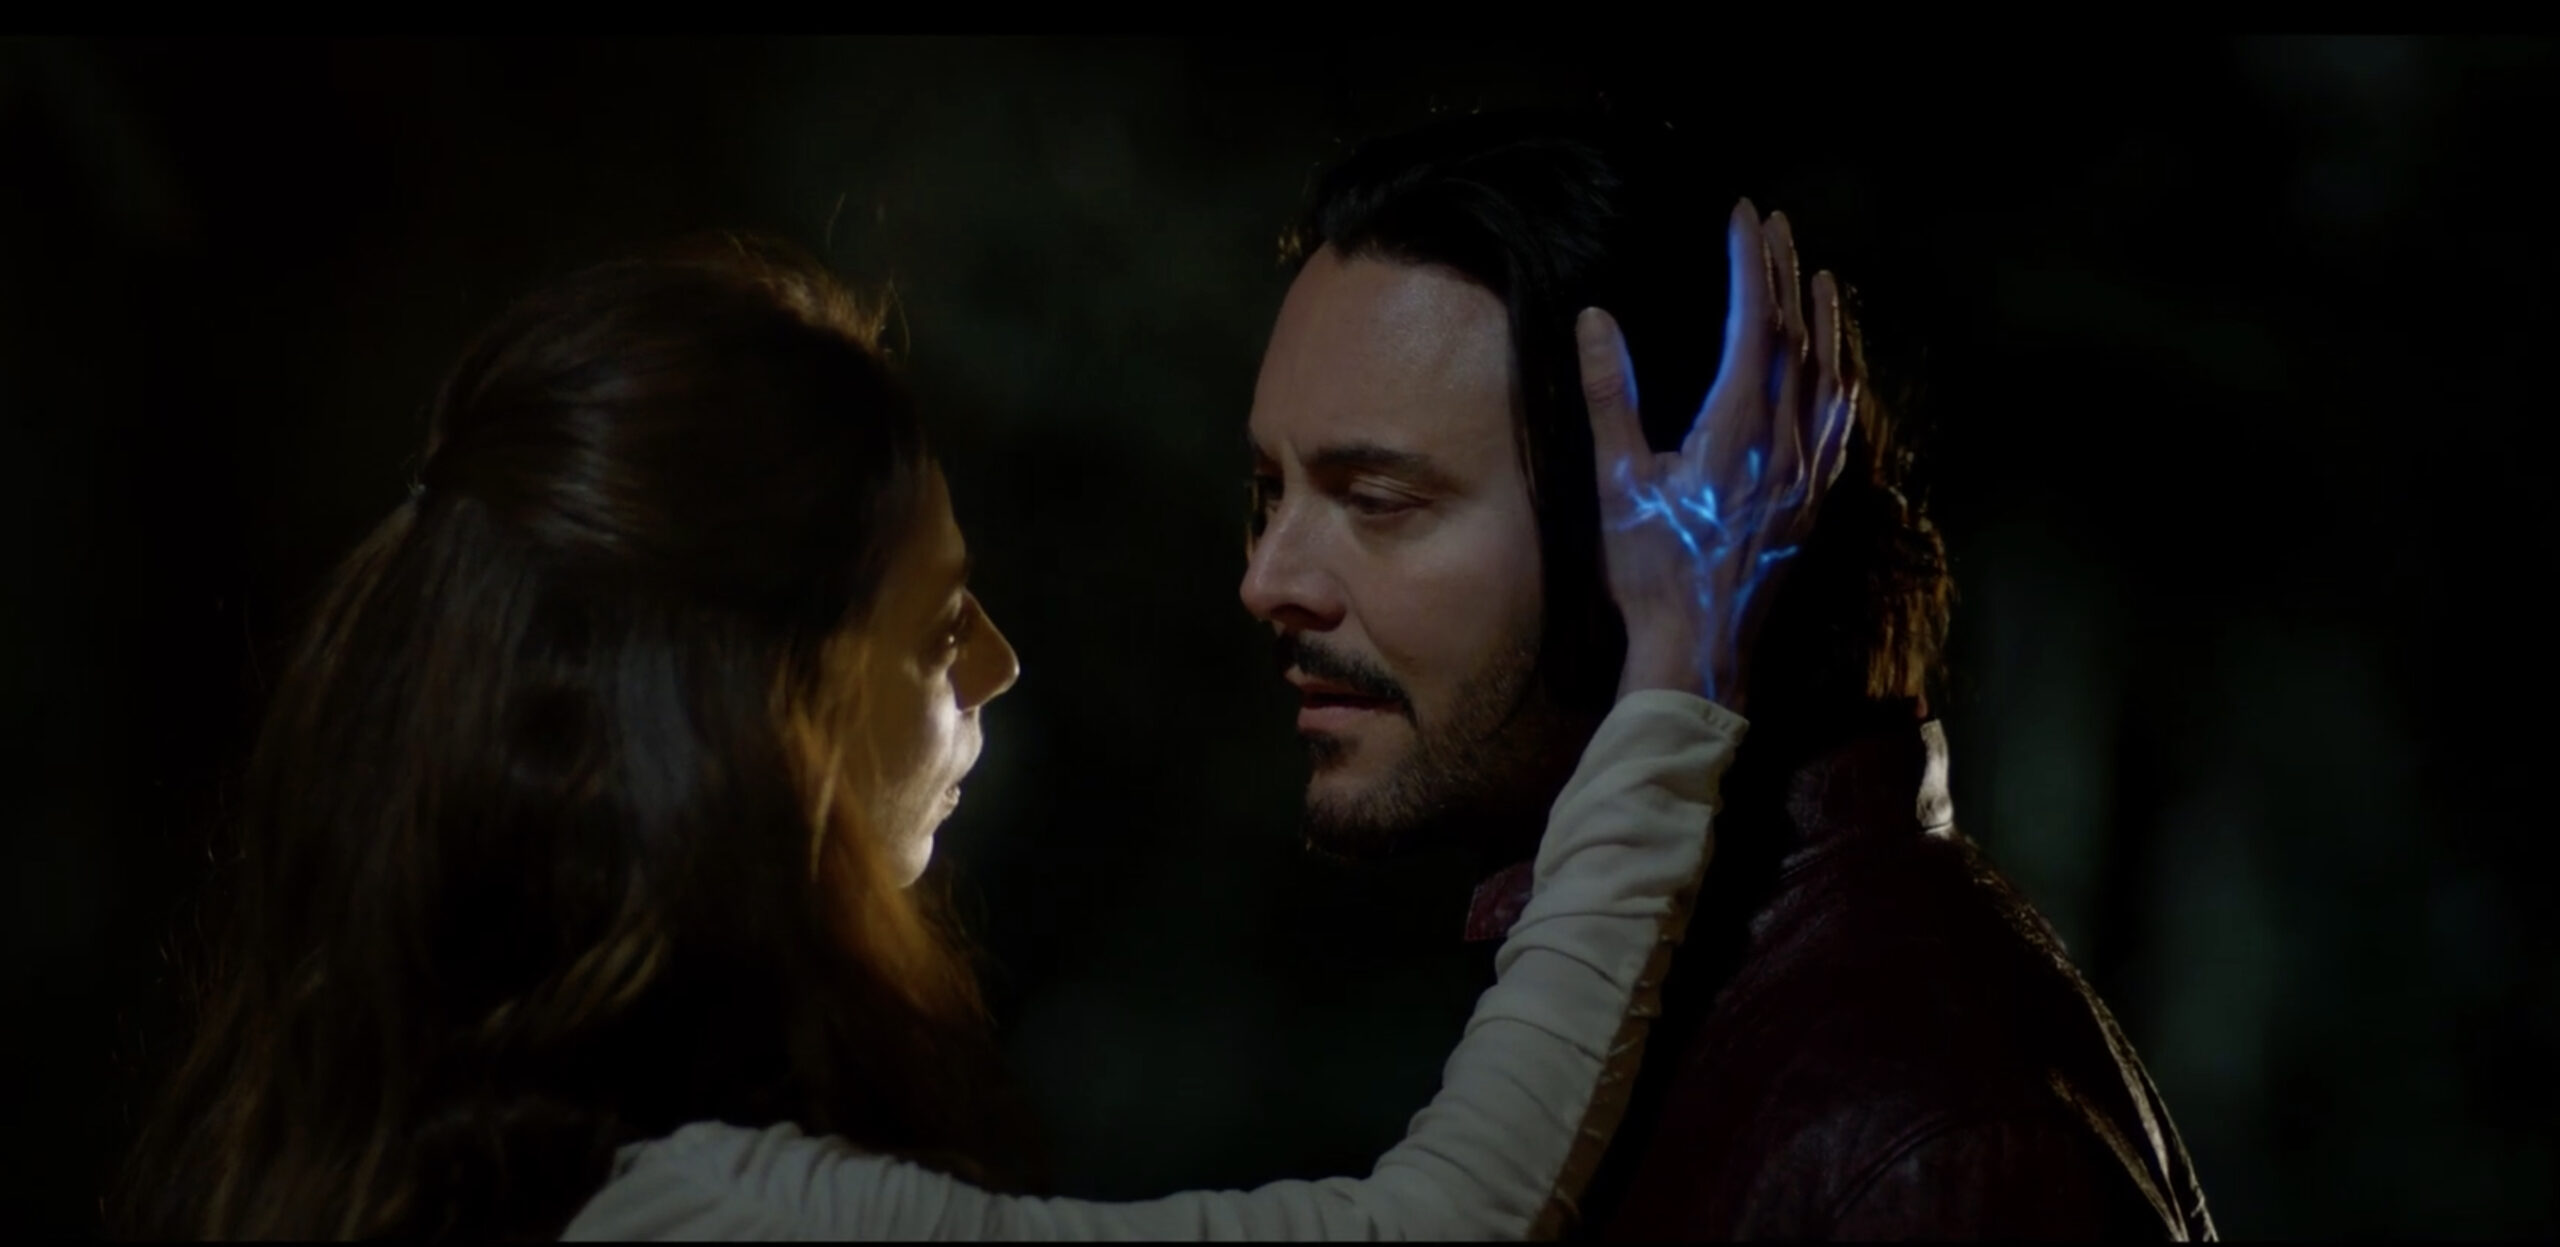 The Angel Gabrielle and Baal in Hail Mary. A woman touches a man on the face tenderly, and her hand is glowing with a strange blue light.